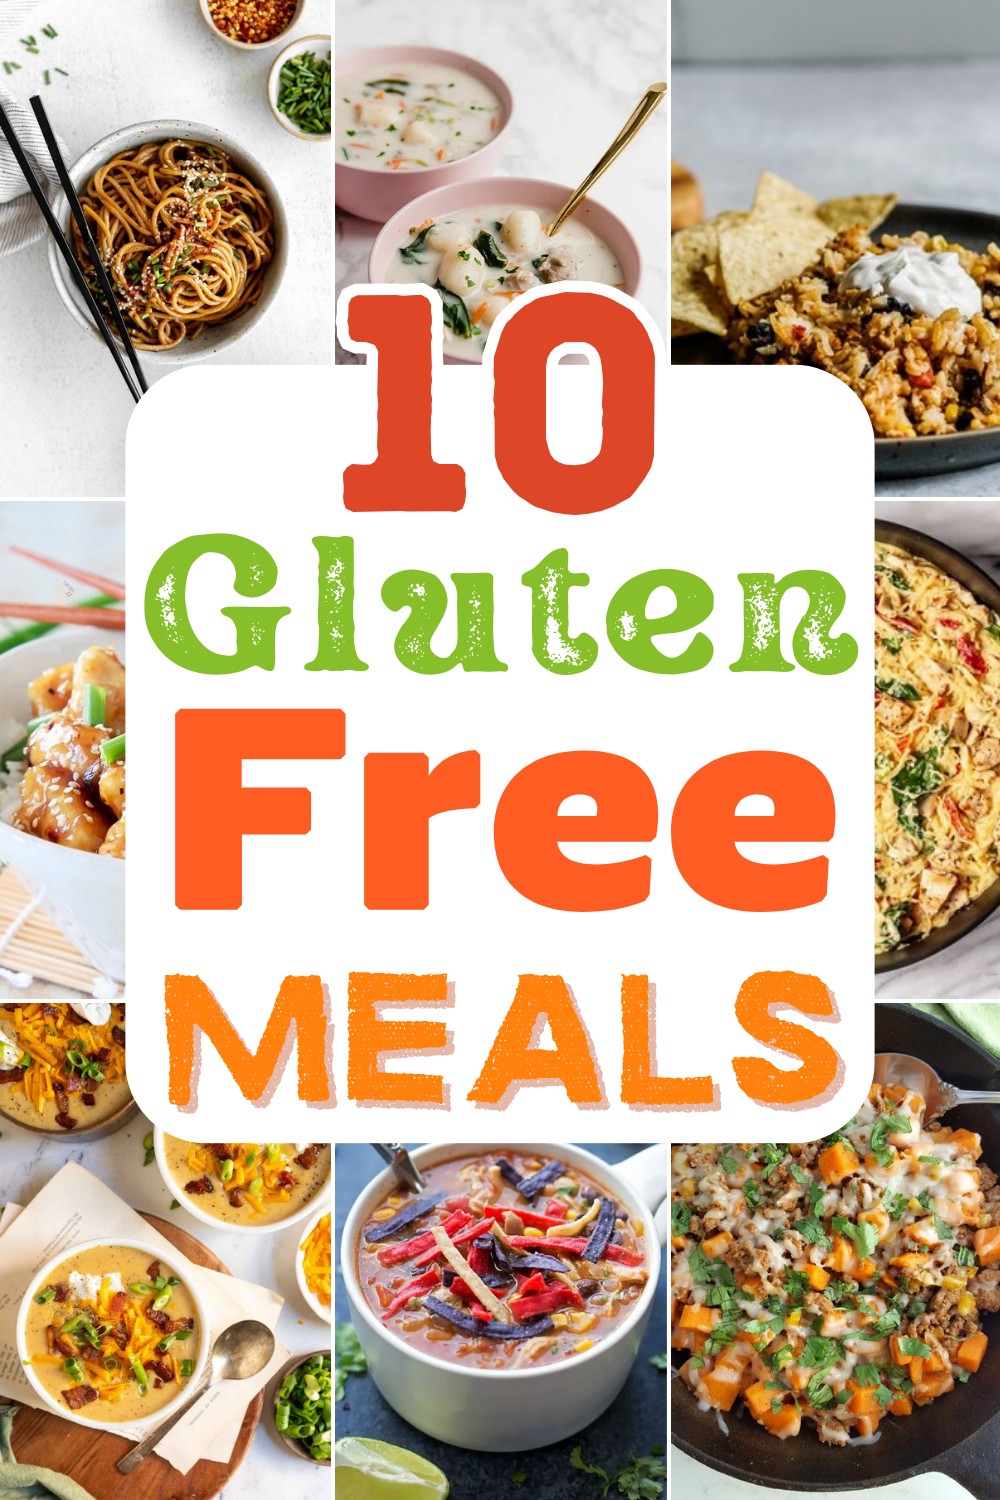 10 Gluten Free Meals For Dietary Tolerant